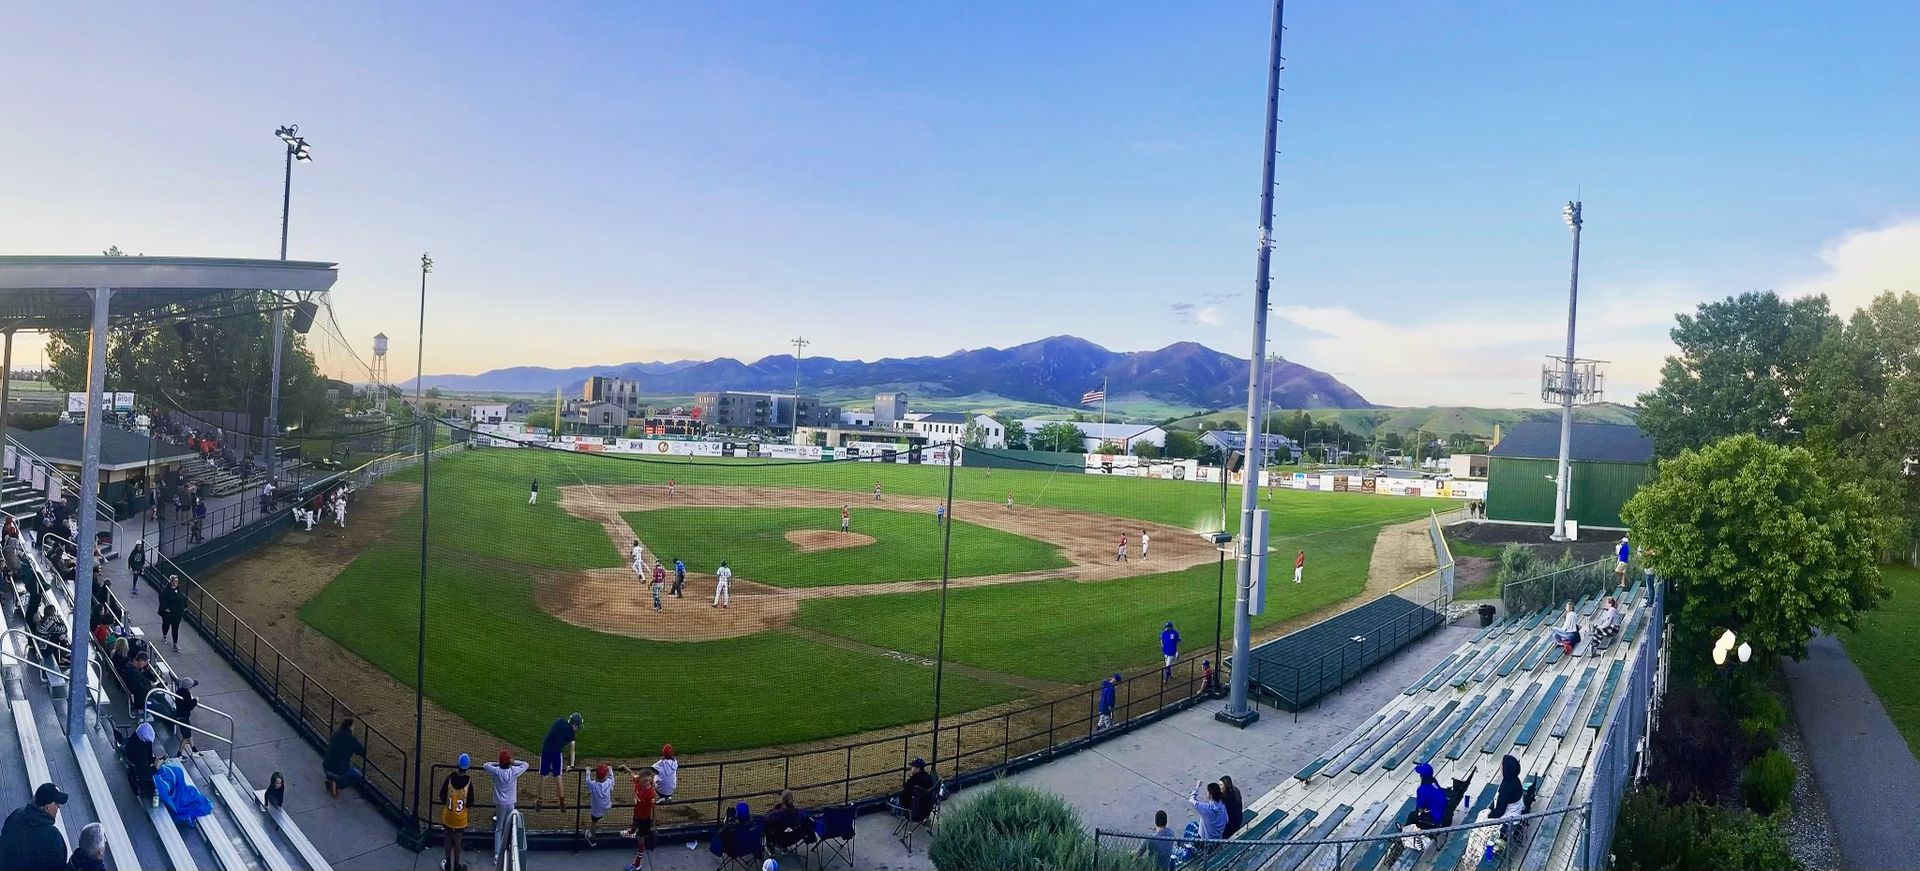 a view of a baseball pitch in Bozeman with the bridges in the background